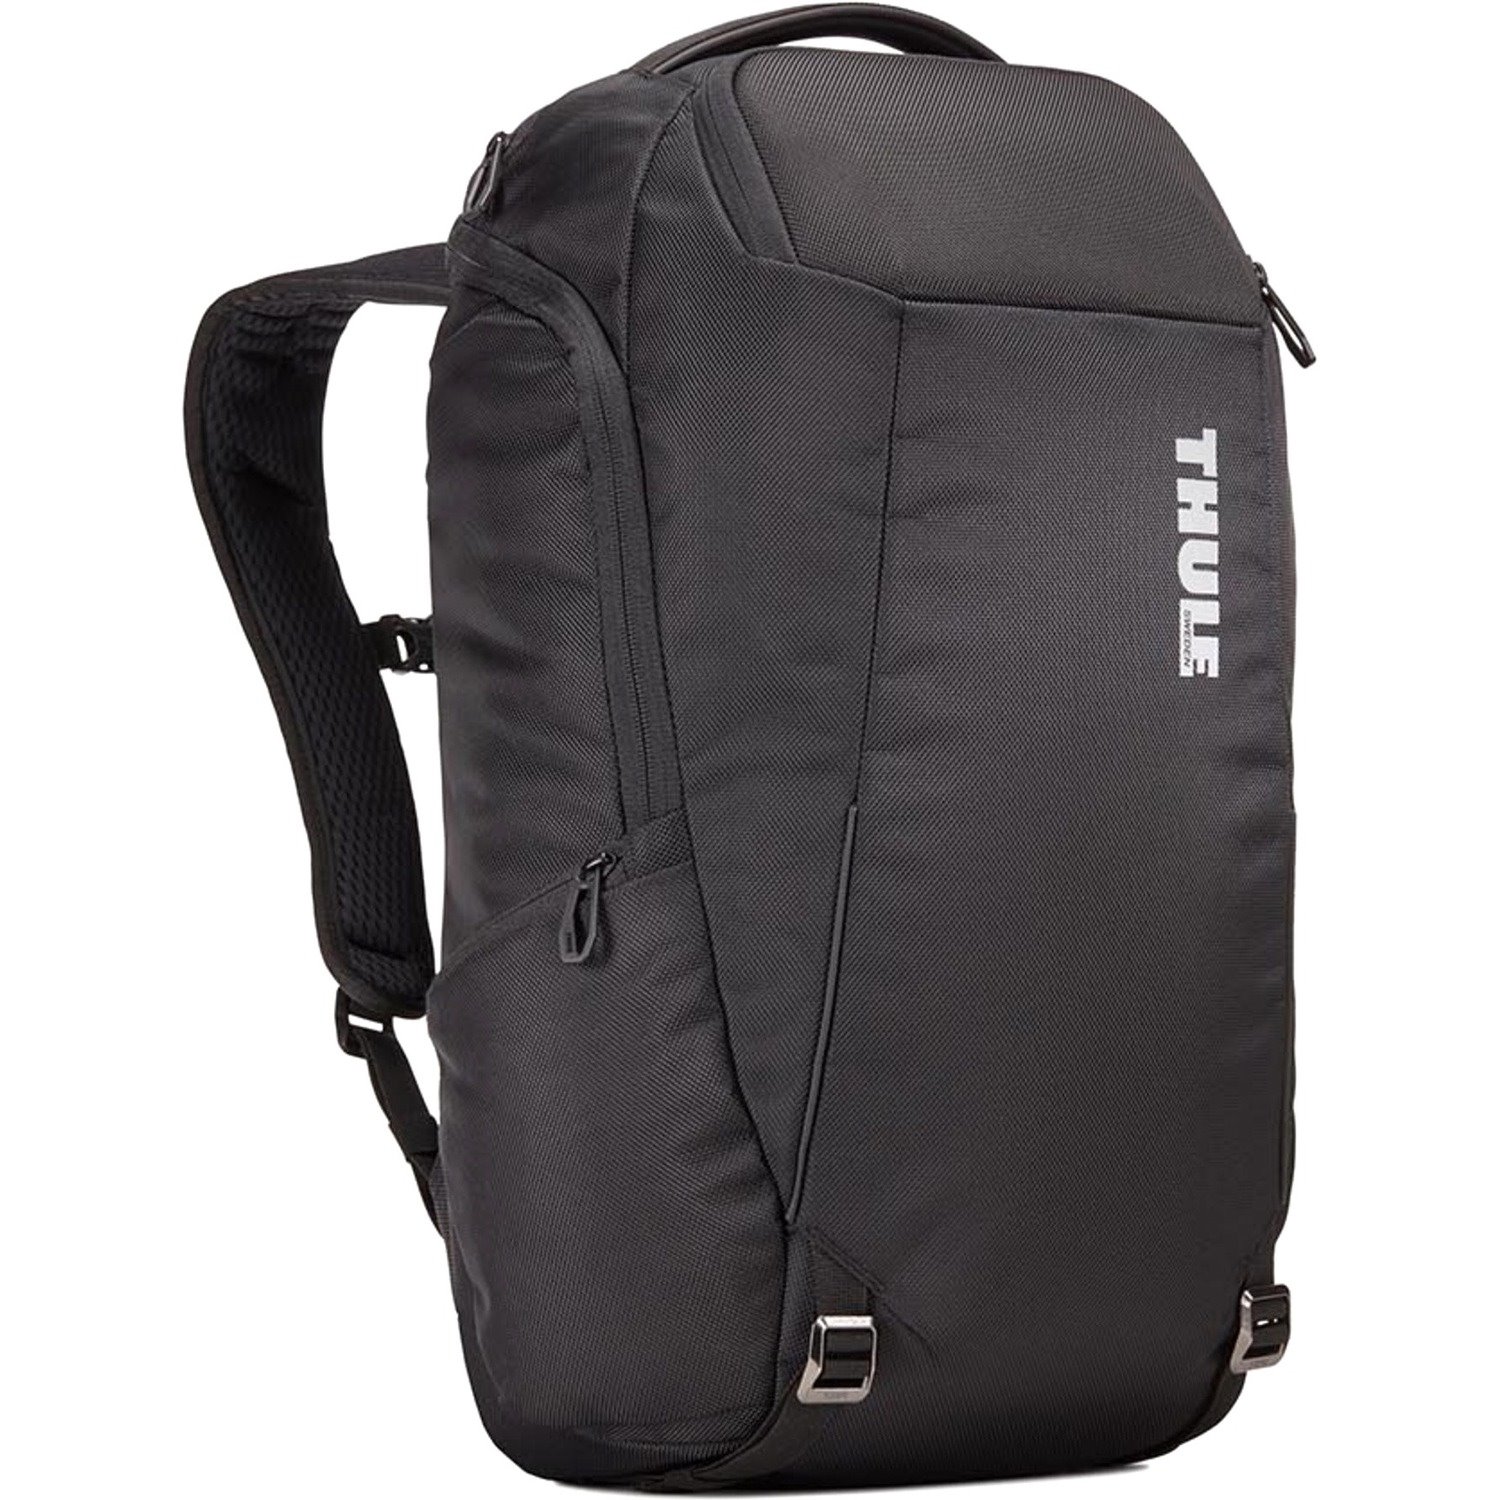 Thule Accent Carrying Case (Backpack) Travel Essential, Tablet PC, Sunglasses - Black